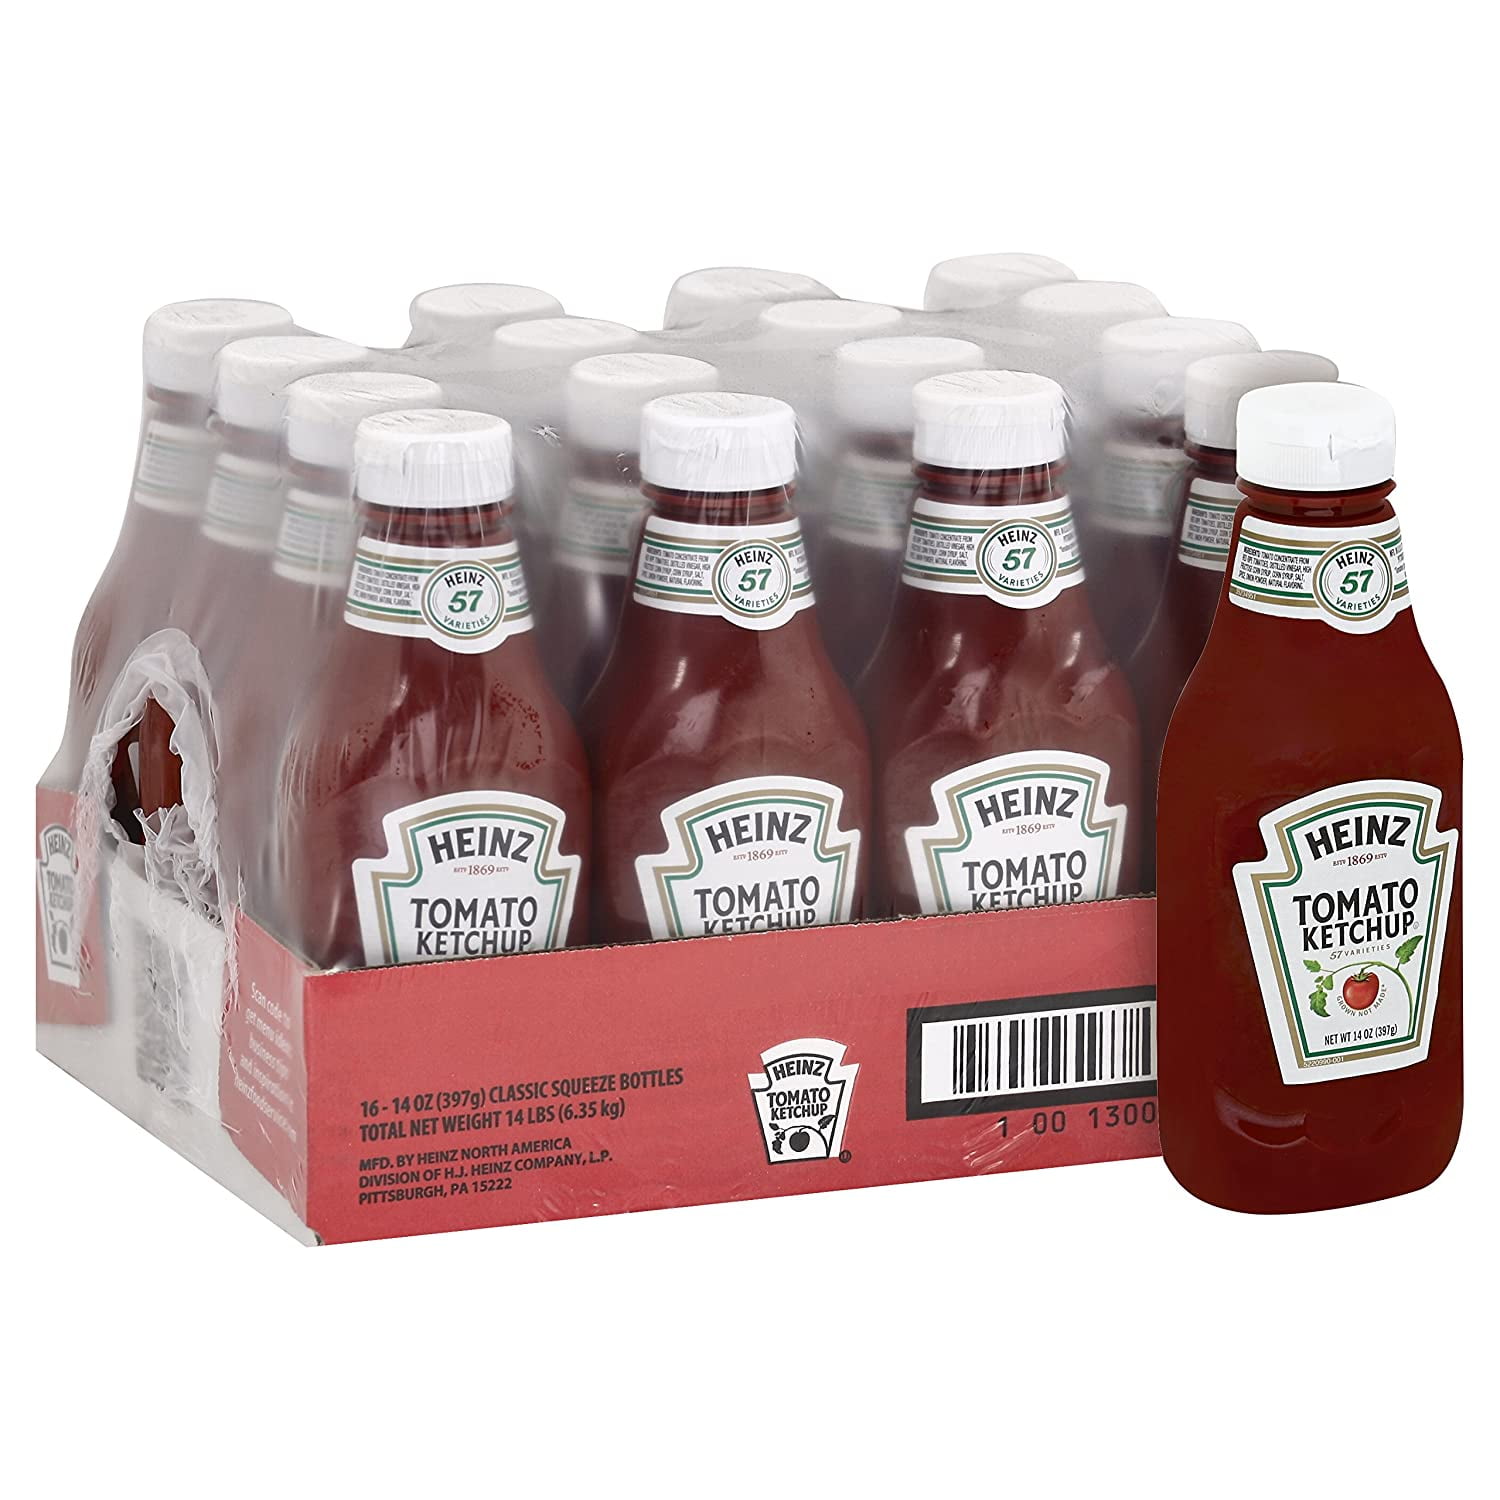 Red Gold Ketchup Squeeze, 14-Ounce (Pack of 3) by  